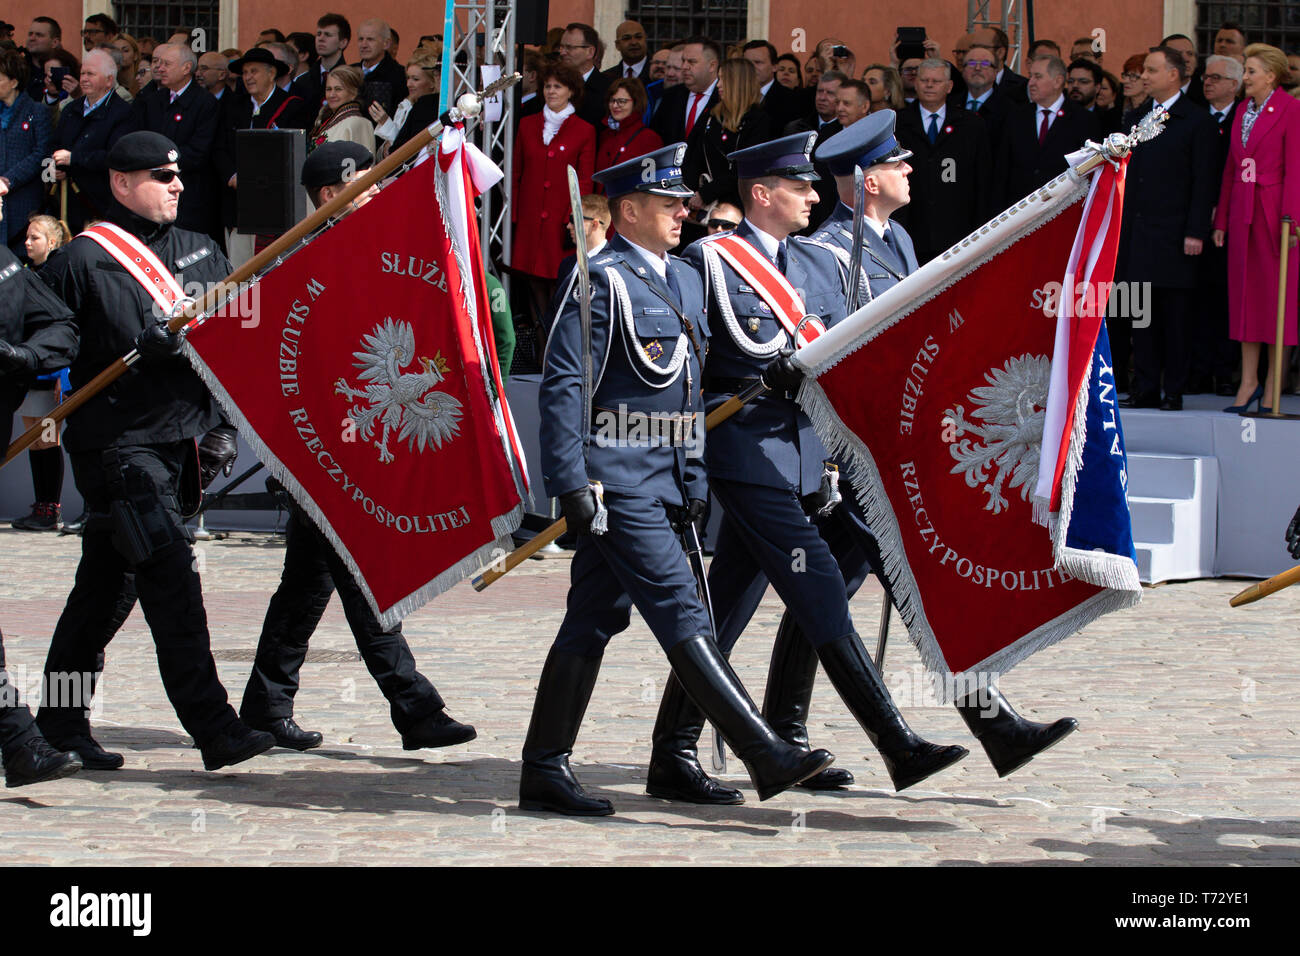 Military troops seen marching while holding flags during the occasion. Celebration of the Constitution Day, May 3 at the Castle Square. Ceremonial military parade on the occasion of the celebration. Stock Photo